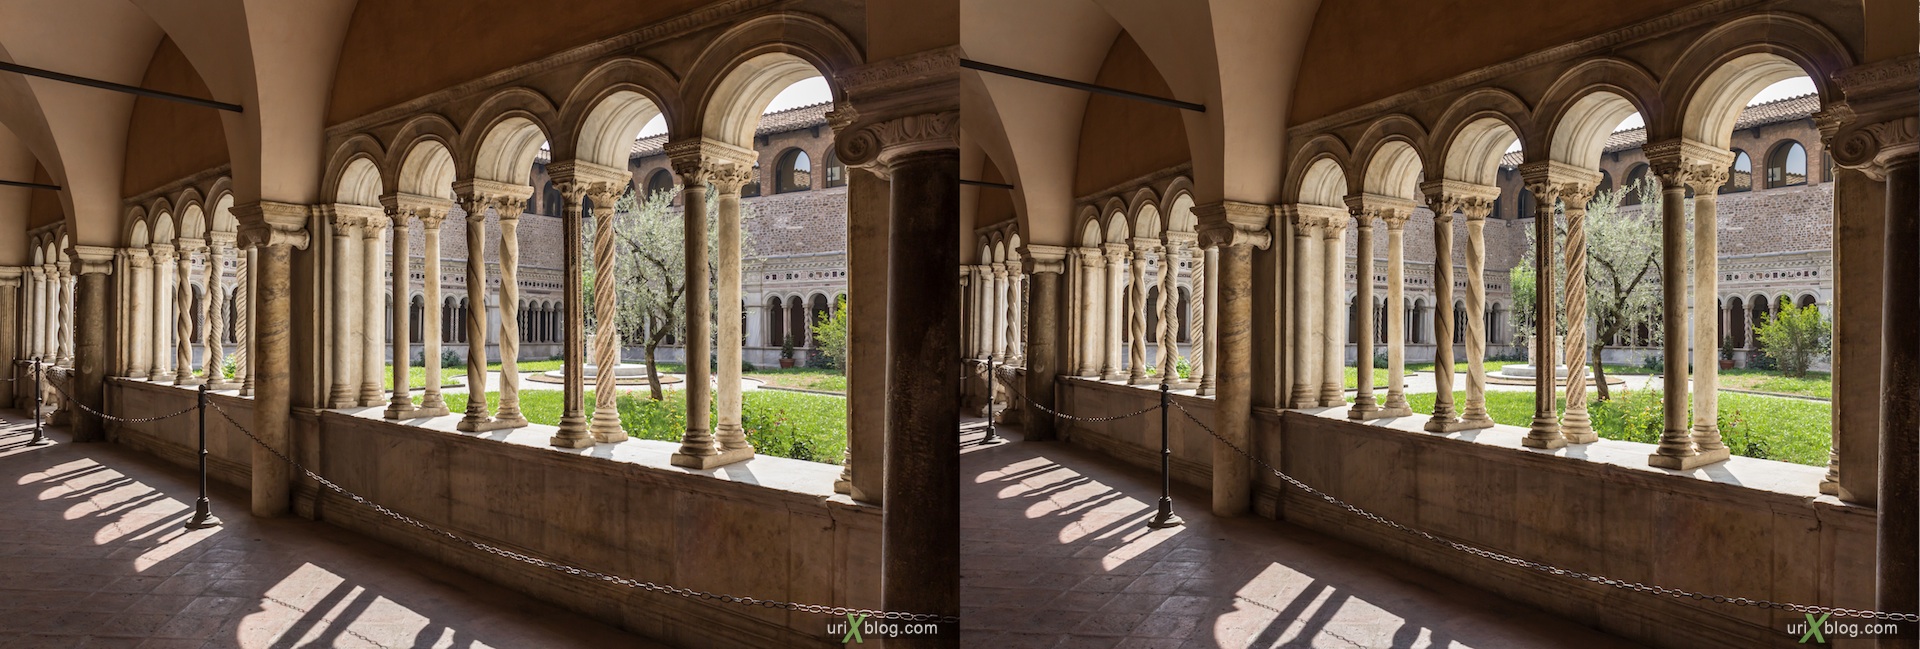 2012, church, basilica of San Giovanni in Laterano, Rome, Italy, cathedral, monastery, Christianity, Catholicism, 3D, stereo pair, cross-eyed, crossview, cross view stereo pair